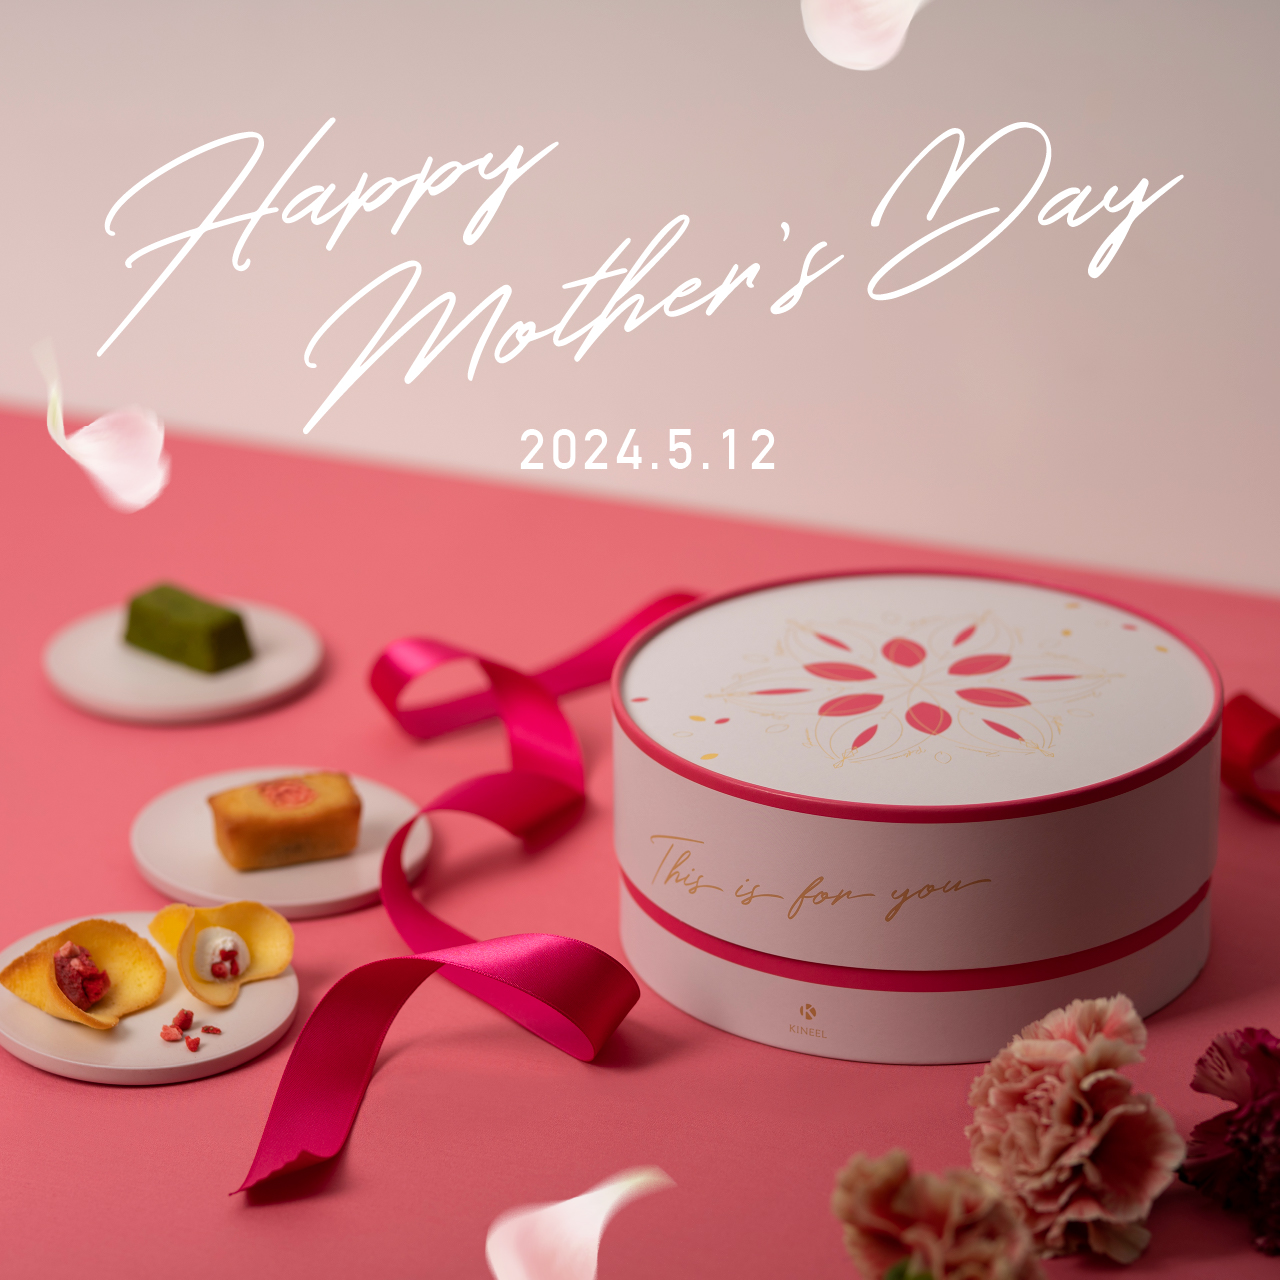 Happy Mother's day 2024.5.12